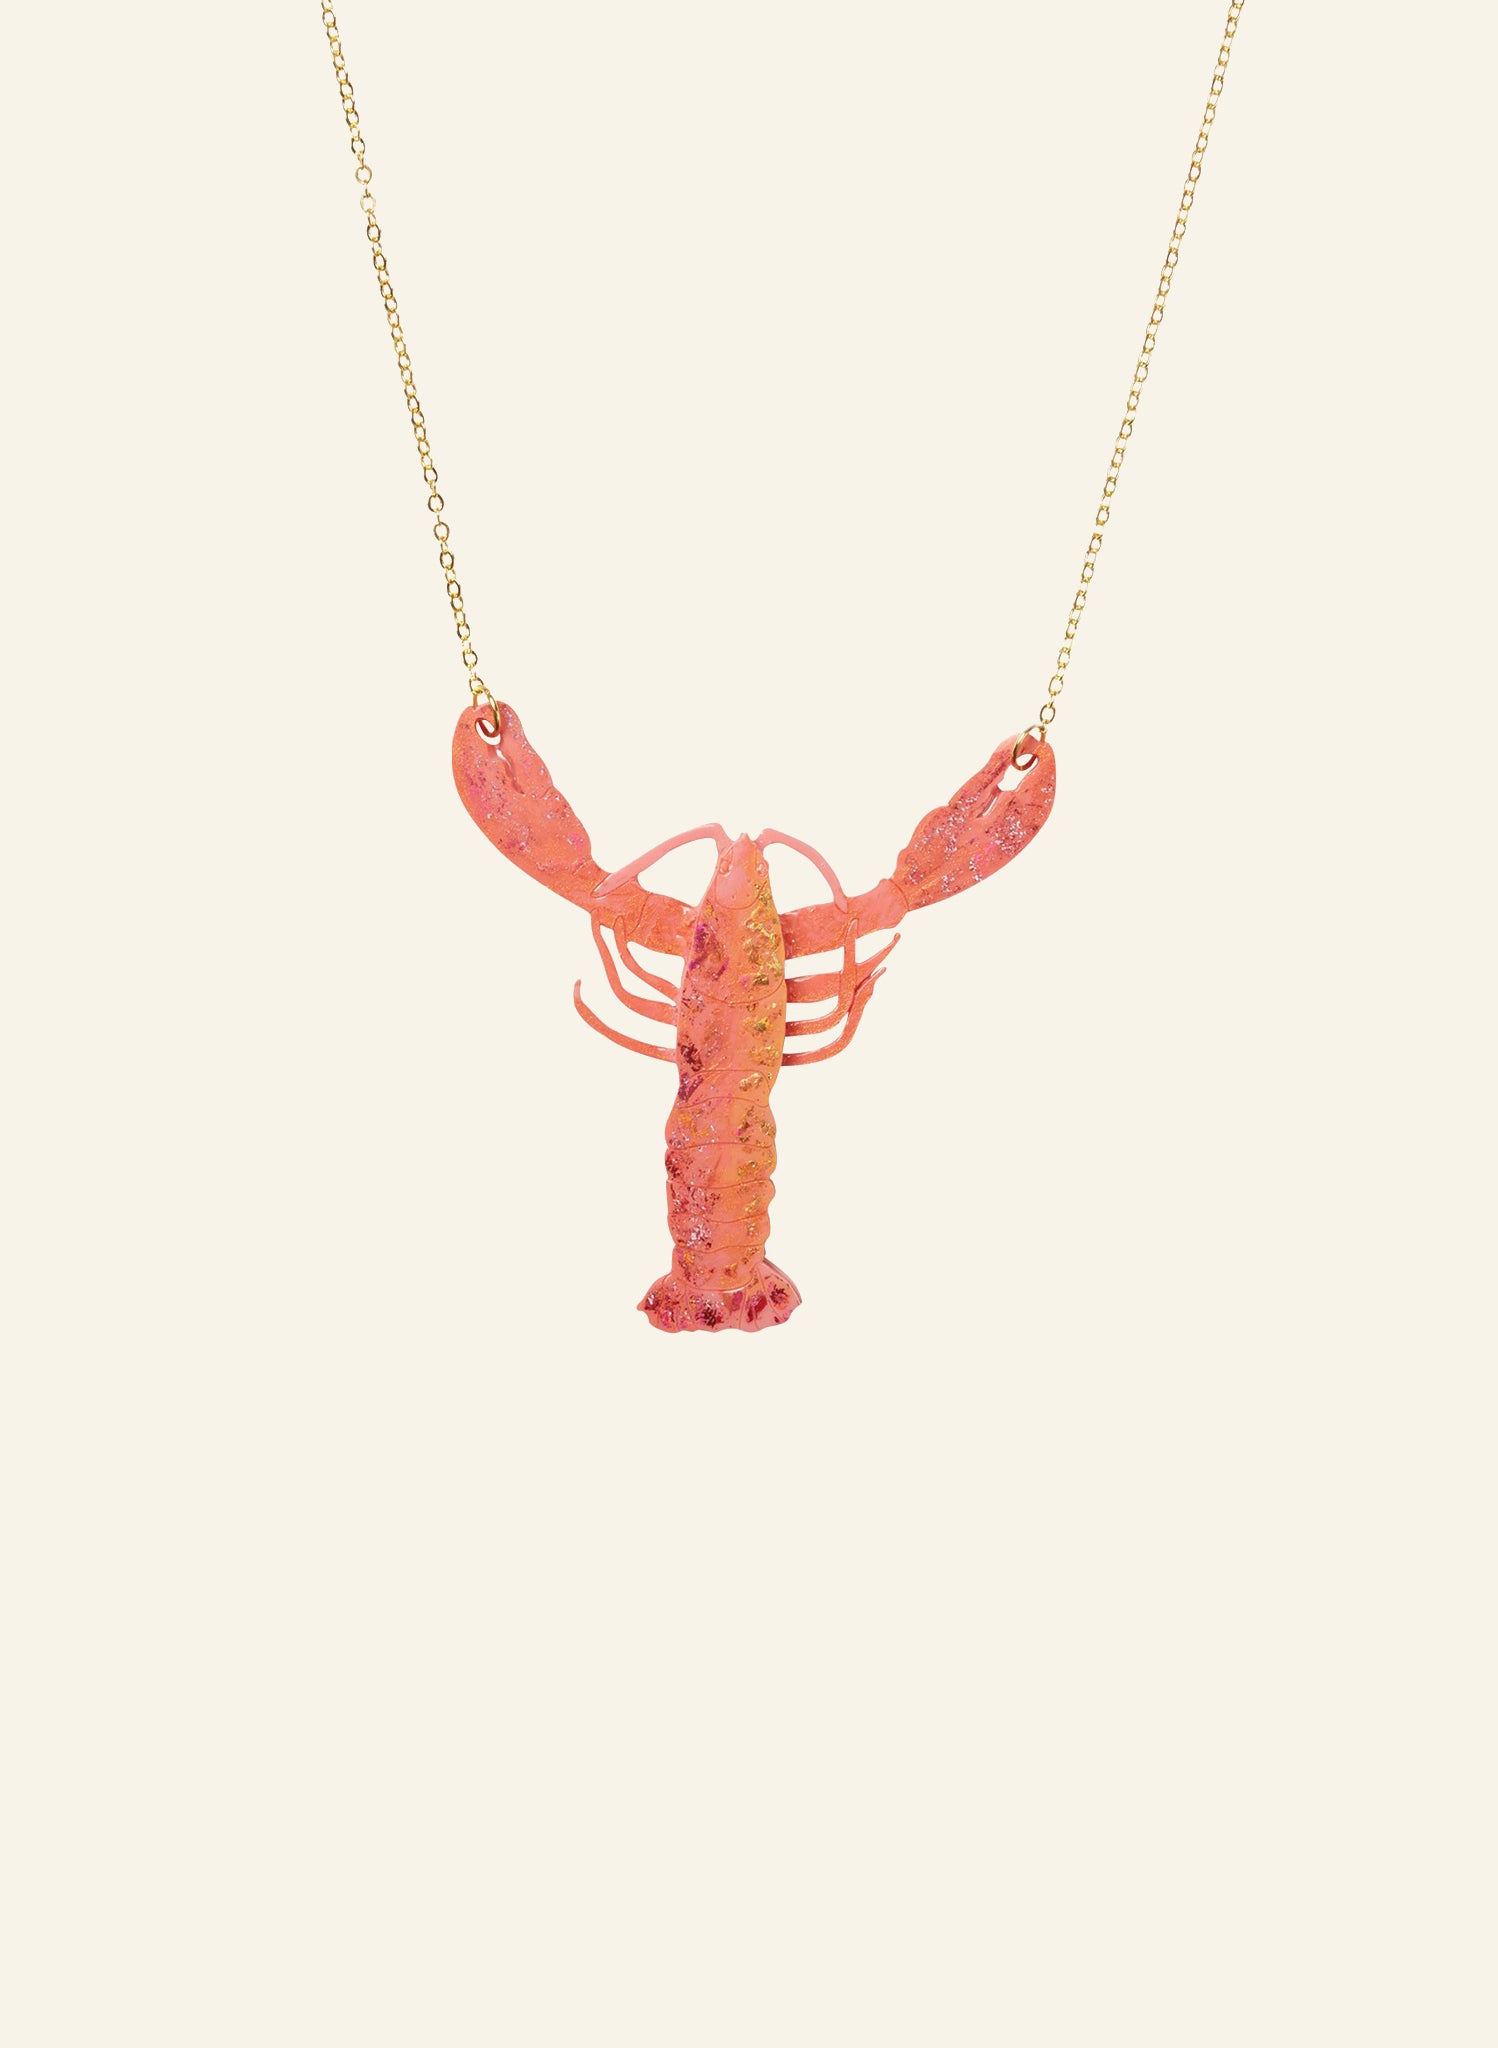 Lobster Necklace - hand painted acrylic